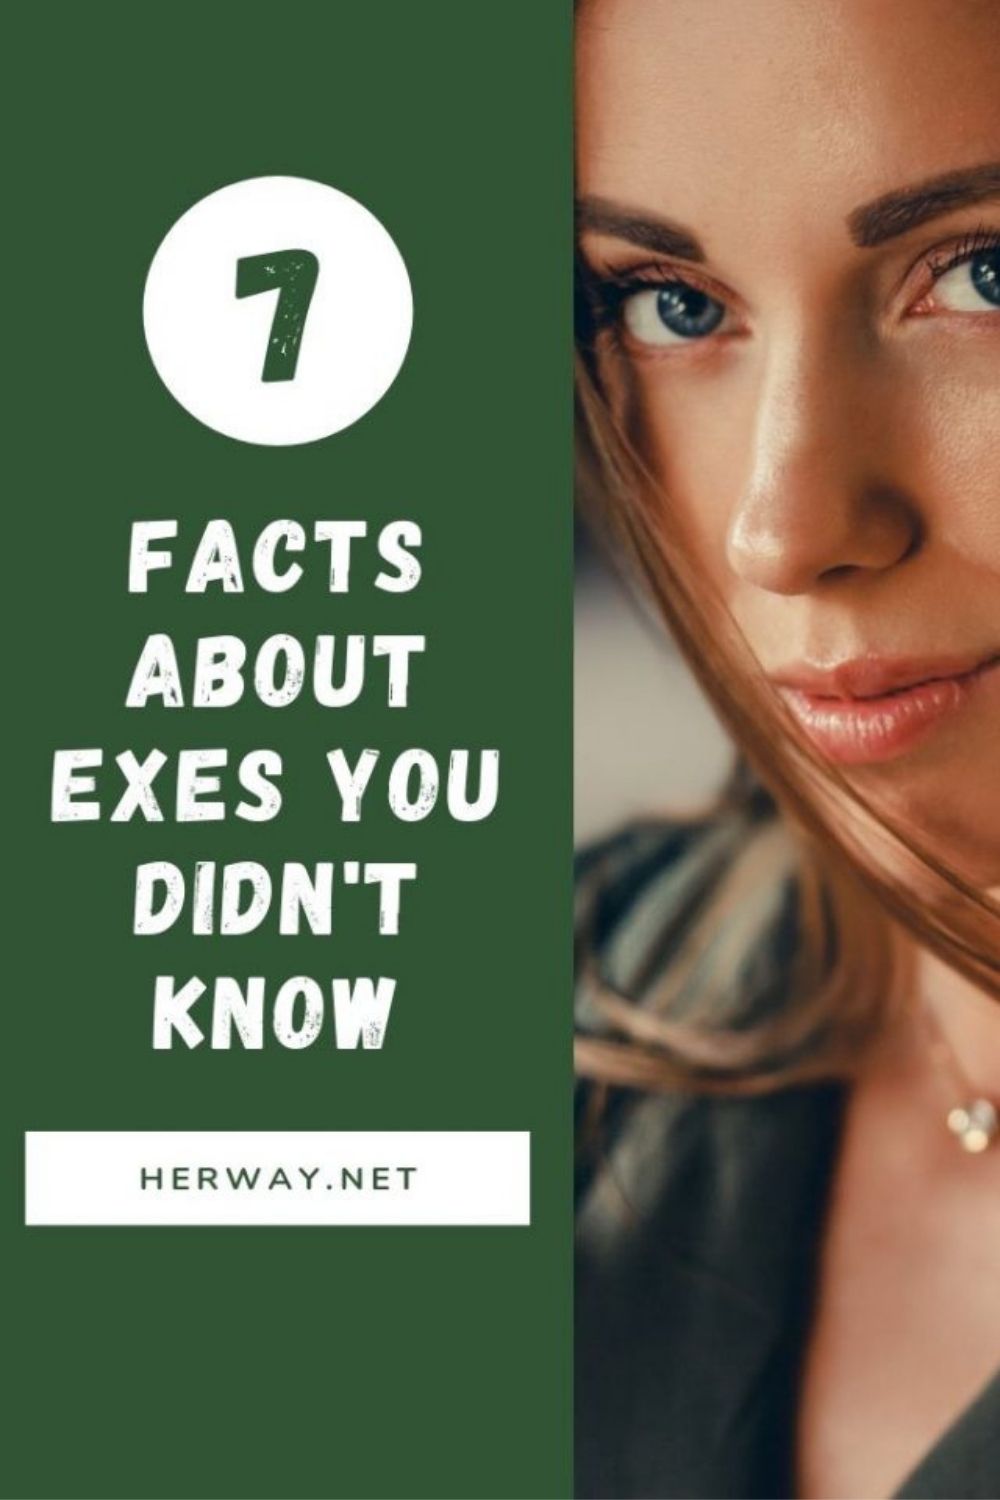 7 Facts About Exes You Didn't Know